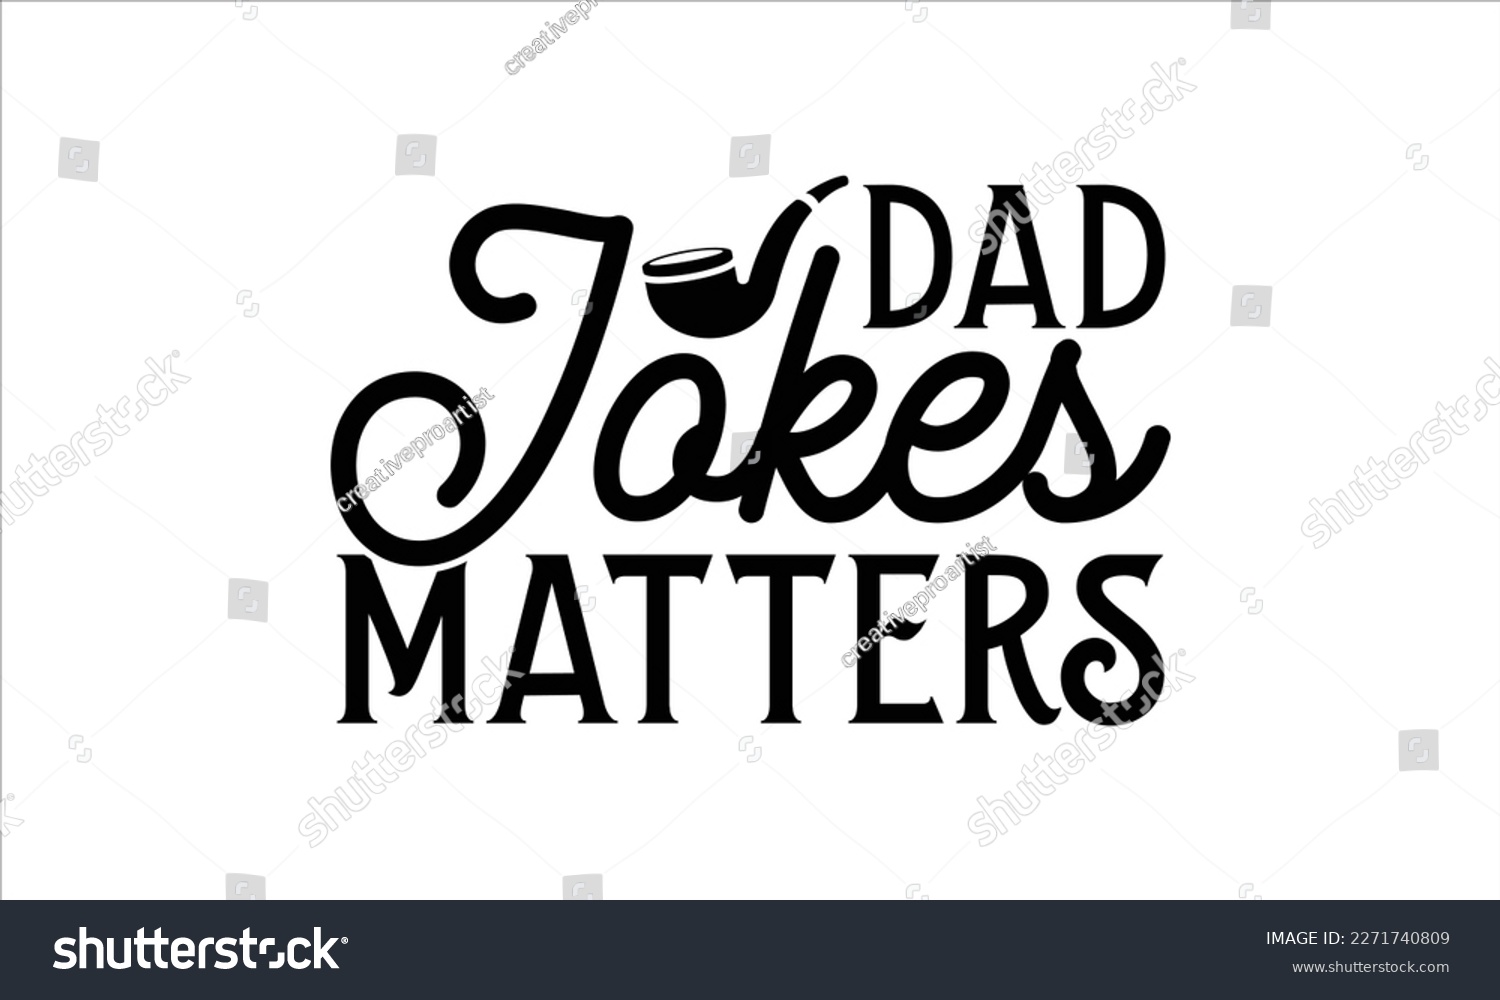 SVG of dad jokes matters- Father's Day svg design, Hand drawn lettering phrase isolated on white background, Illustration for prints on t-shirts and bags, posters, cards eps 10. svg